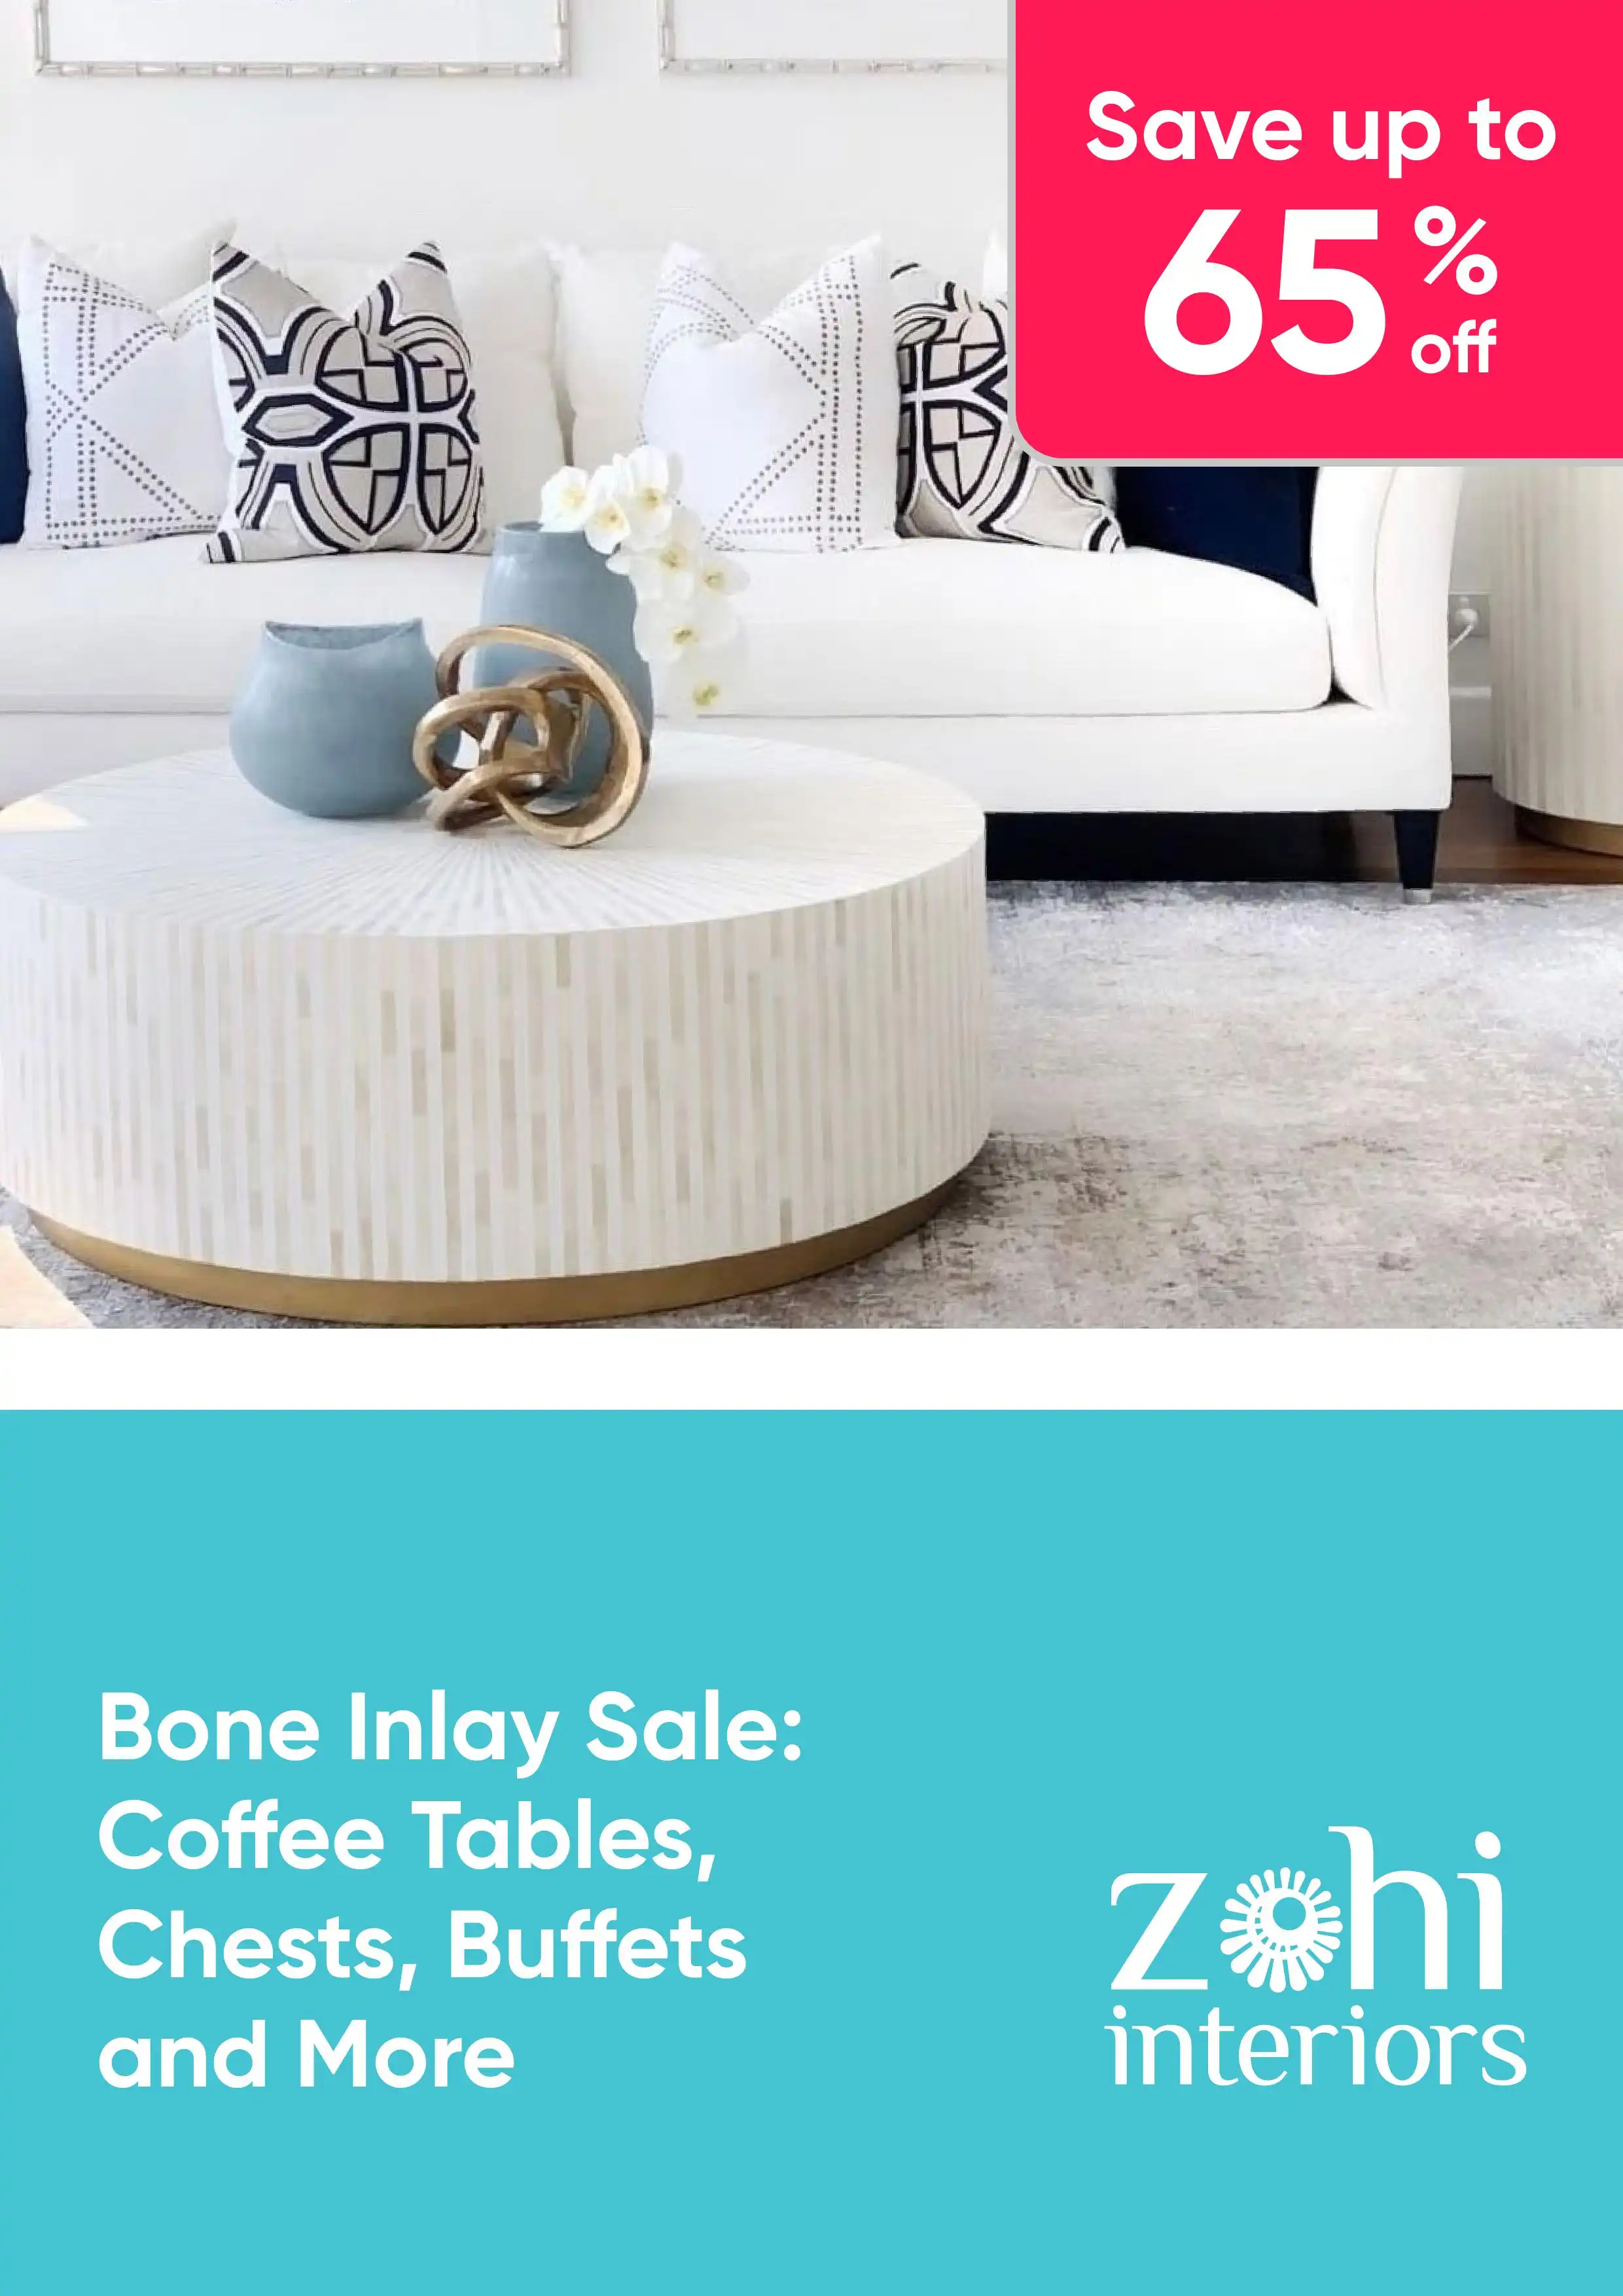 Bone Inlay Sale: Coffee Tables, Chests, Buffets and More – up to 65% off